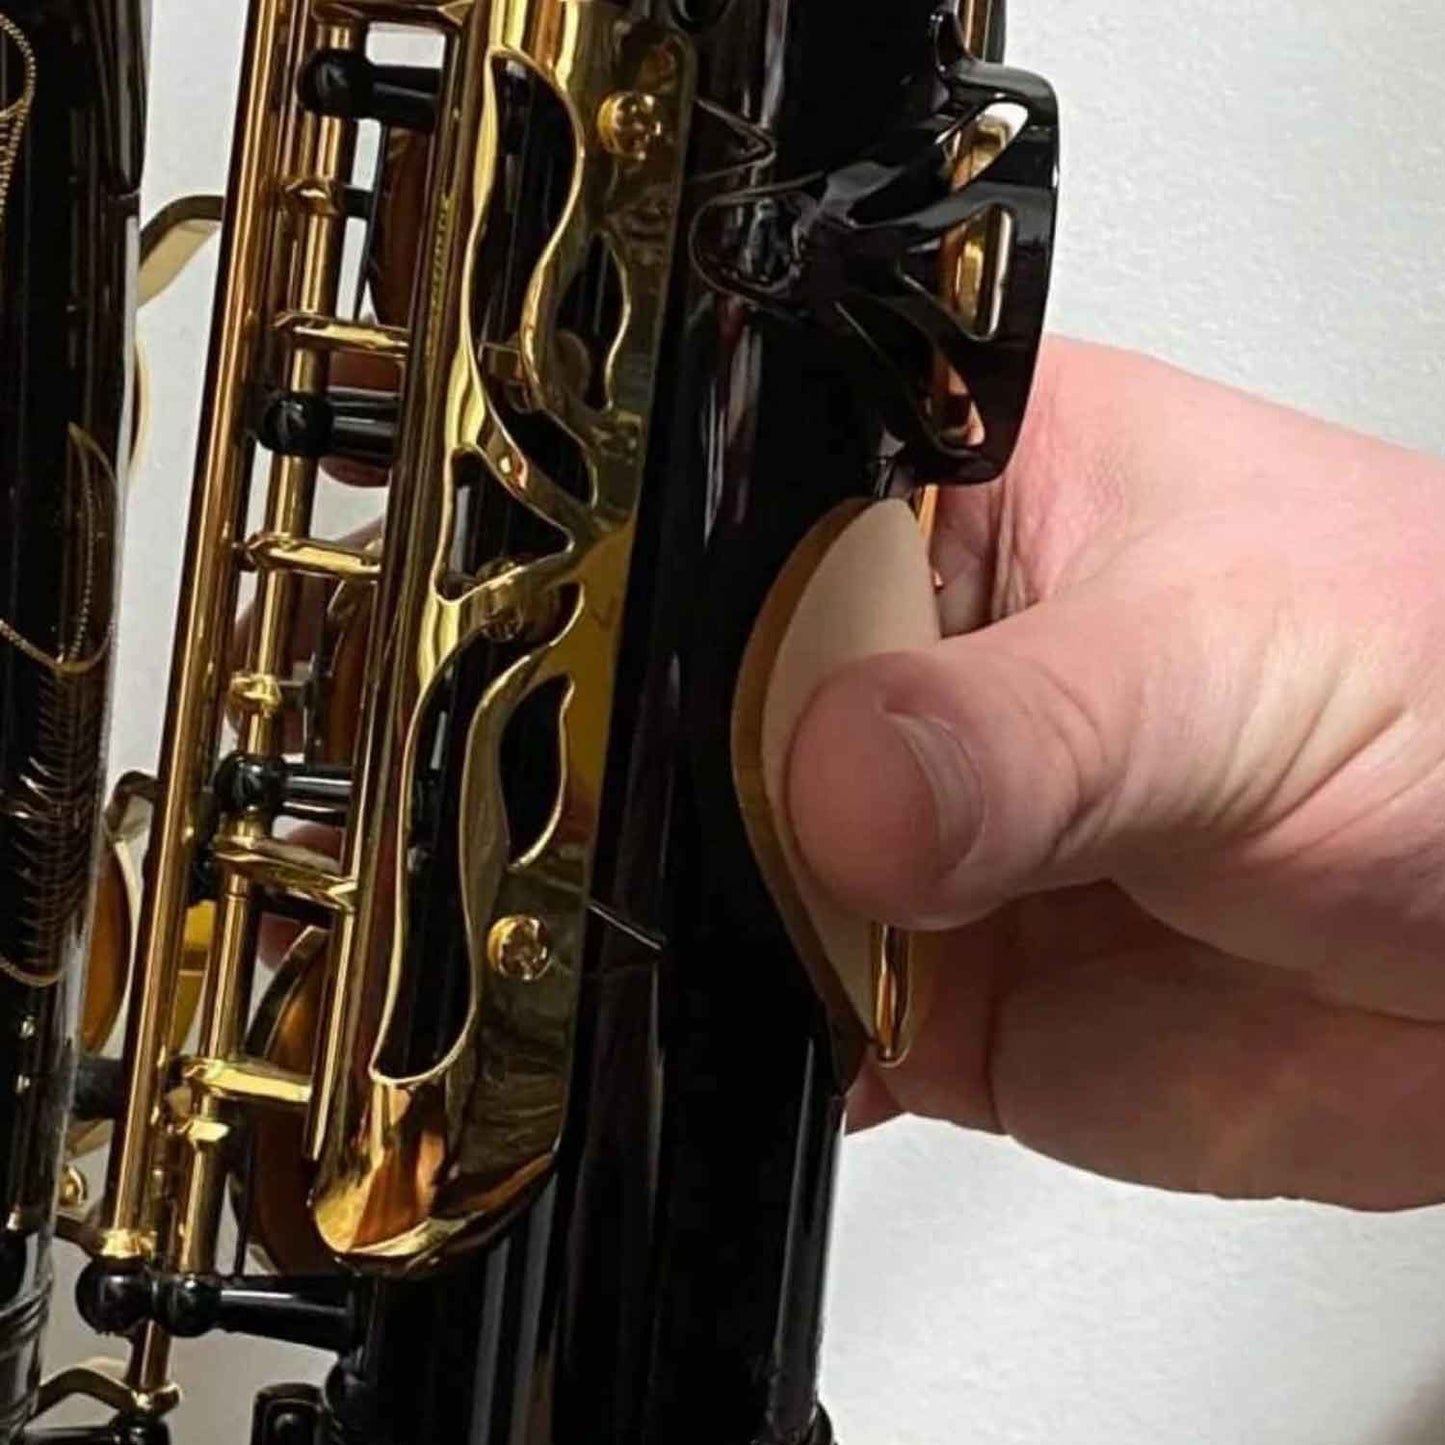 A close up view of the RULON saxophone thumb rest being used with very large hands on an alto saxophone.